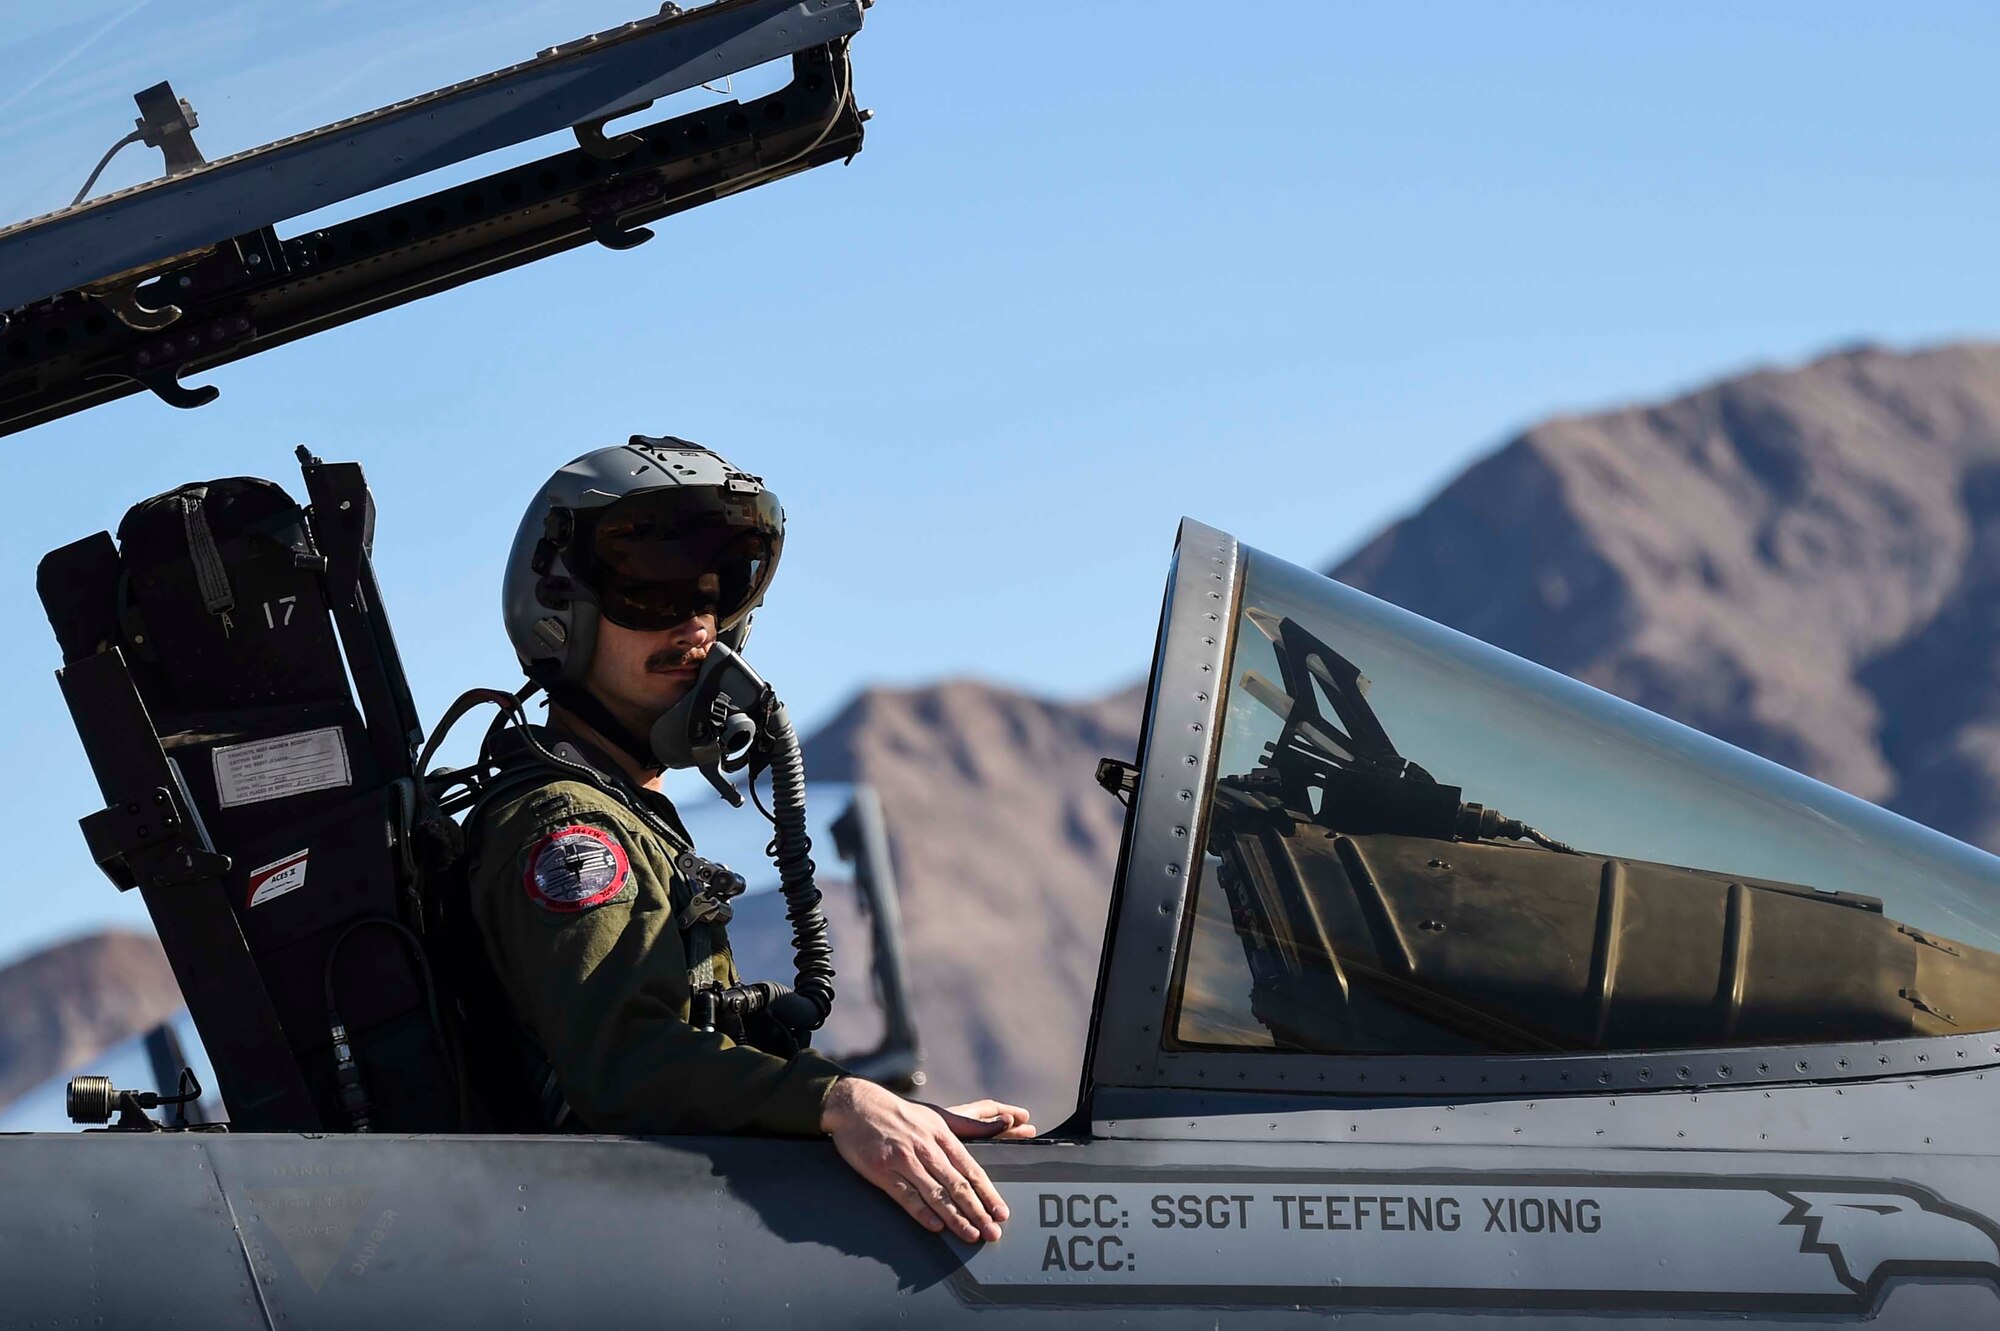 U.S. Air Force 1st Lt. Jonathan Pavan, 194th Fighter Squadron pilot, prepares for a combat training mission at Nellis Air Force Base, Nev. Feb. 3, 2016, as part of Red Flag 16-1. There are more than 30 military units from the U.S. and its allies participating in this exercise, which provides the combat air forces the opportunity to fight and train in a peacetime environment, and win together. (U.S. Air National Guard photo by Senior Airman Klynne Pearl Serrano)